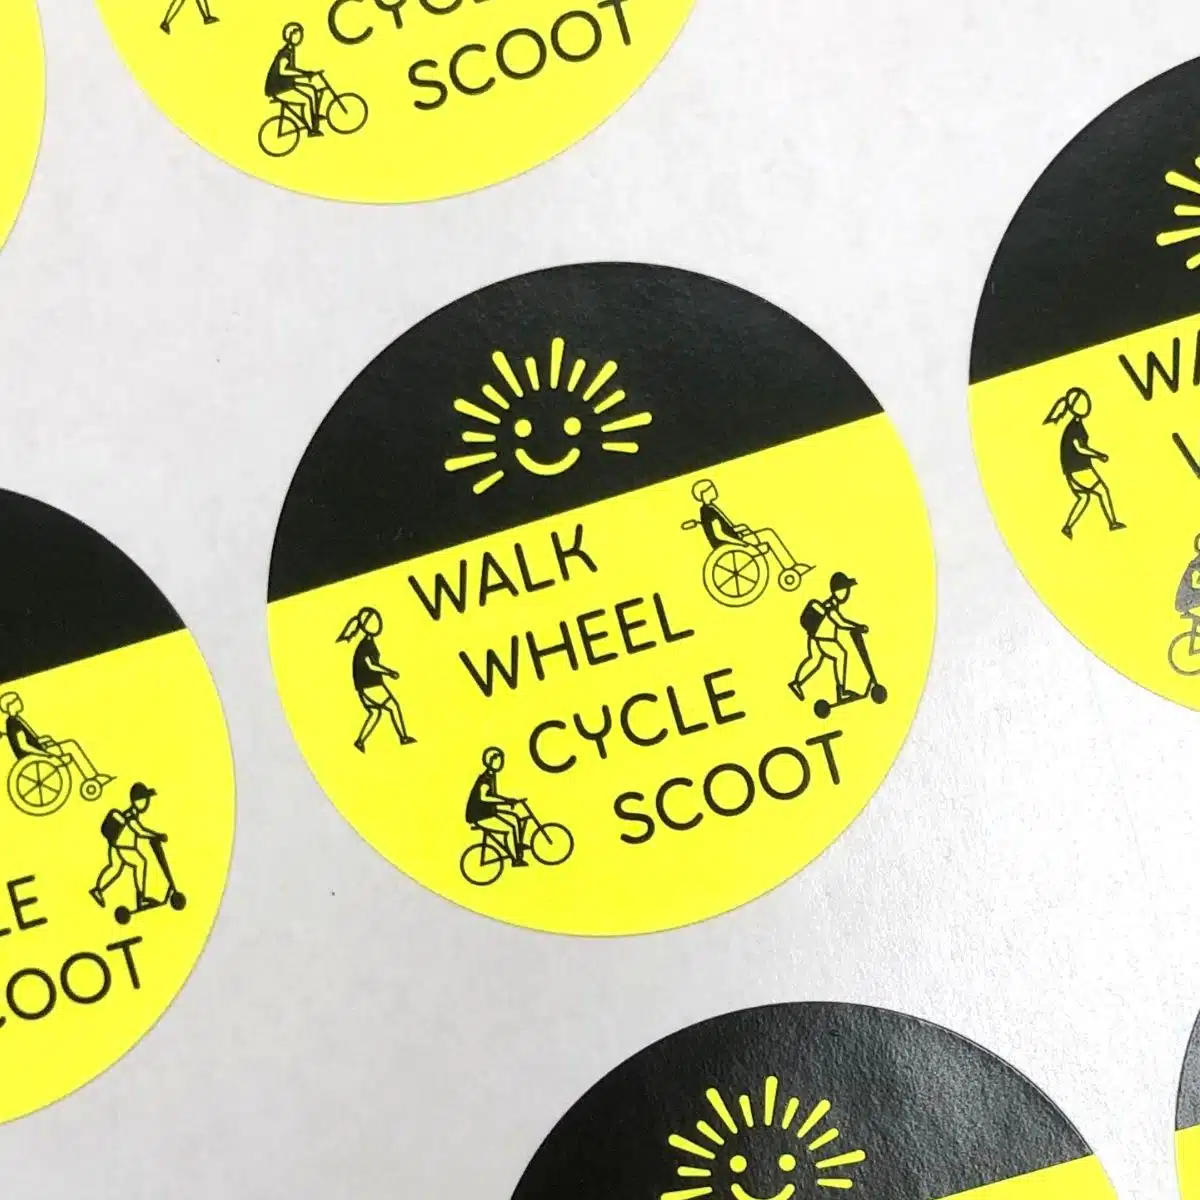 Active Travel Stickers, Walk, Wheel, Cycle, Scoot.